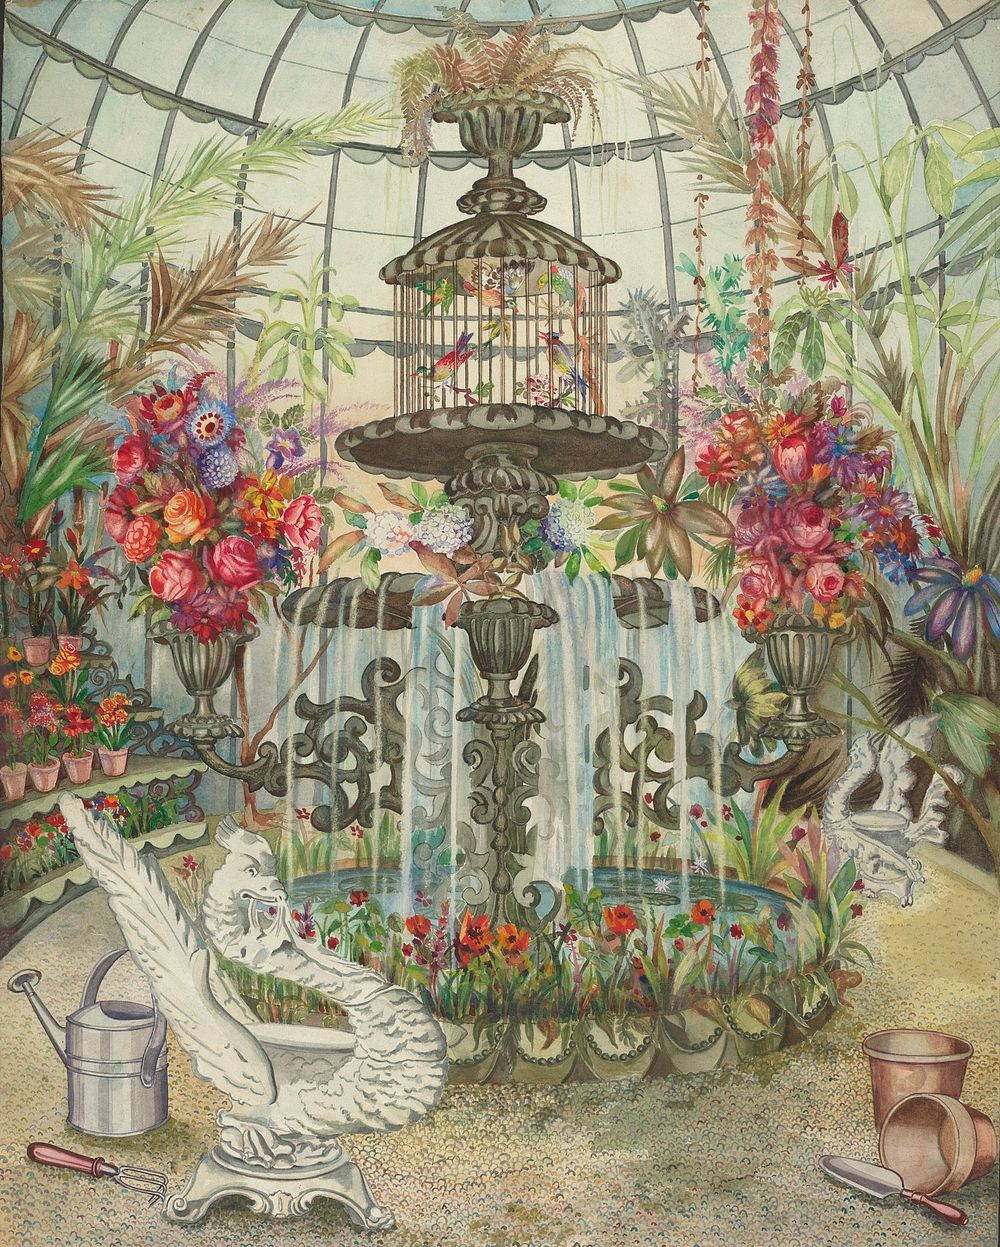 Conservatory Fountain (c. 1938) by Perkins Harnly and Nicholas Zupa.  